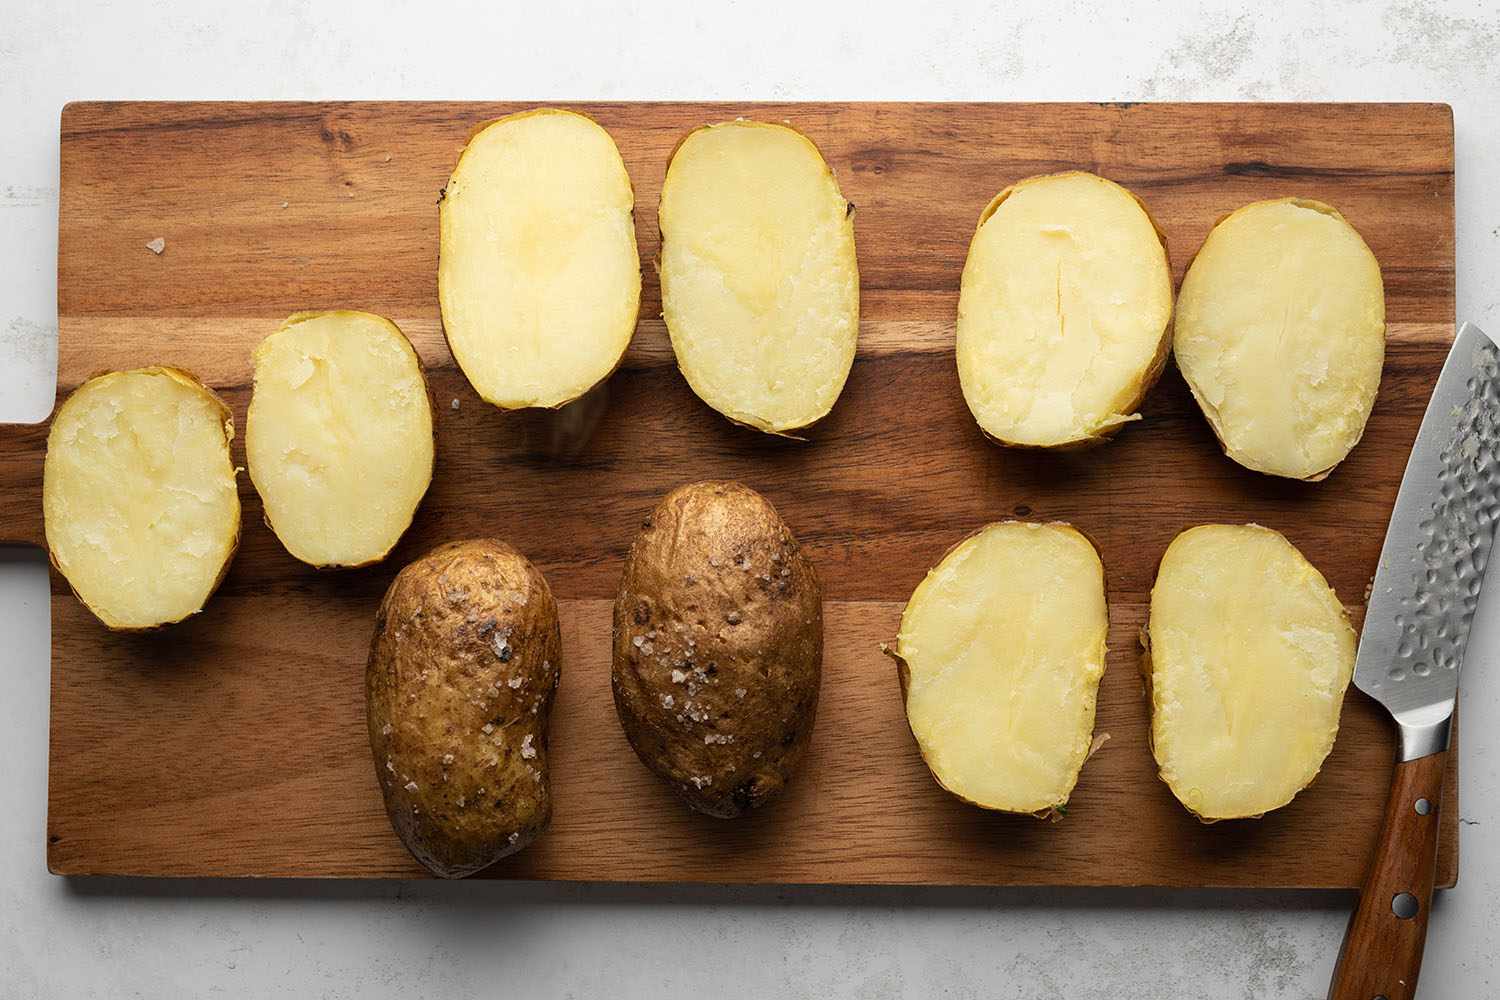 Potatoes sliced in half on a wooden cutting board 